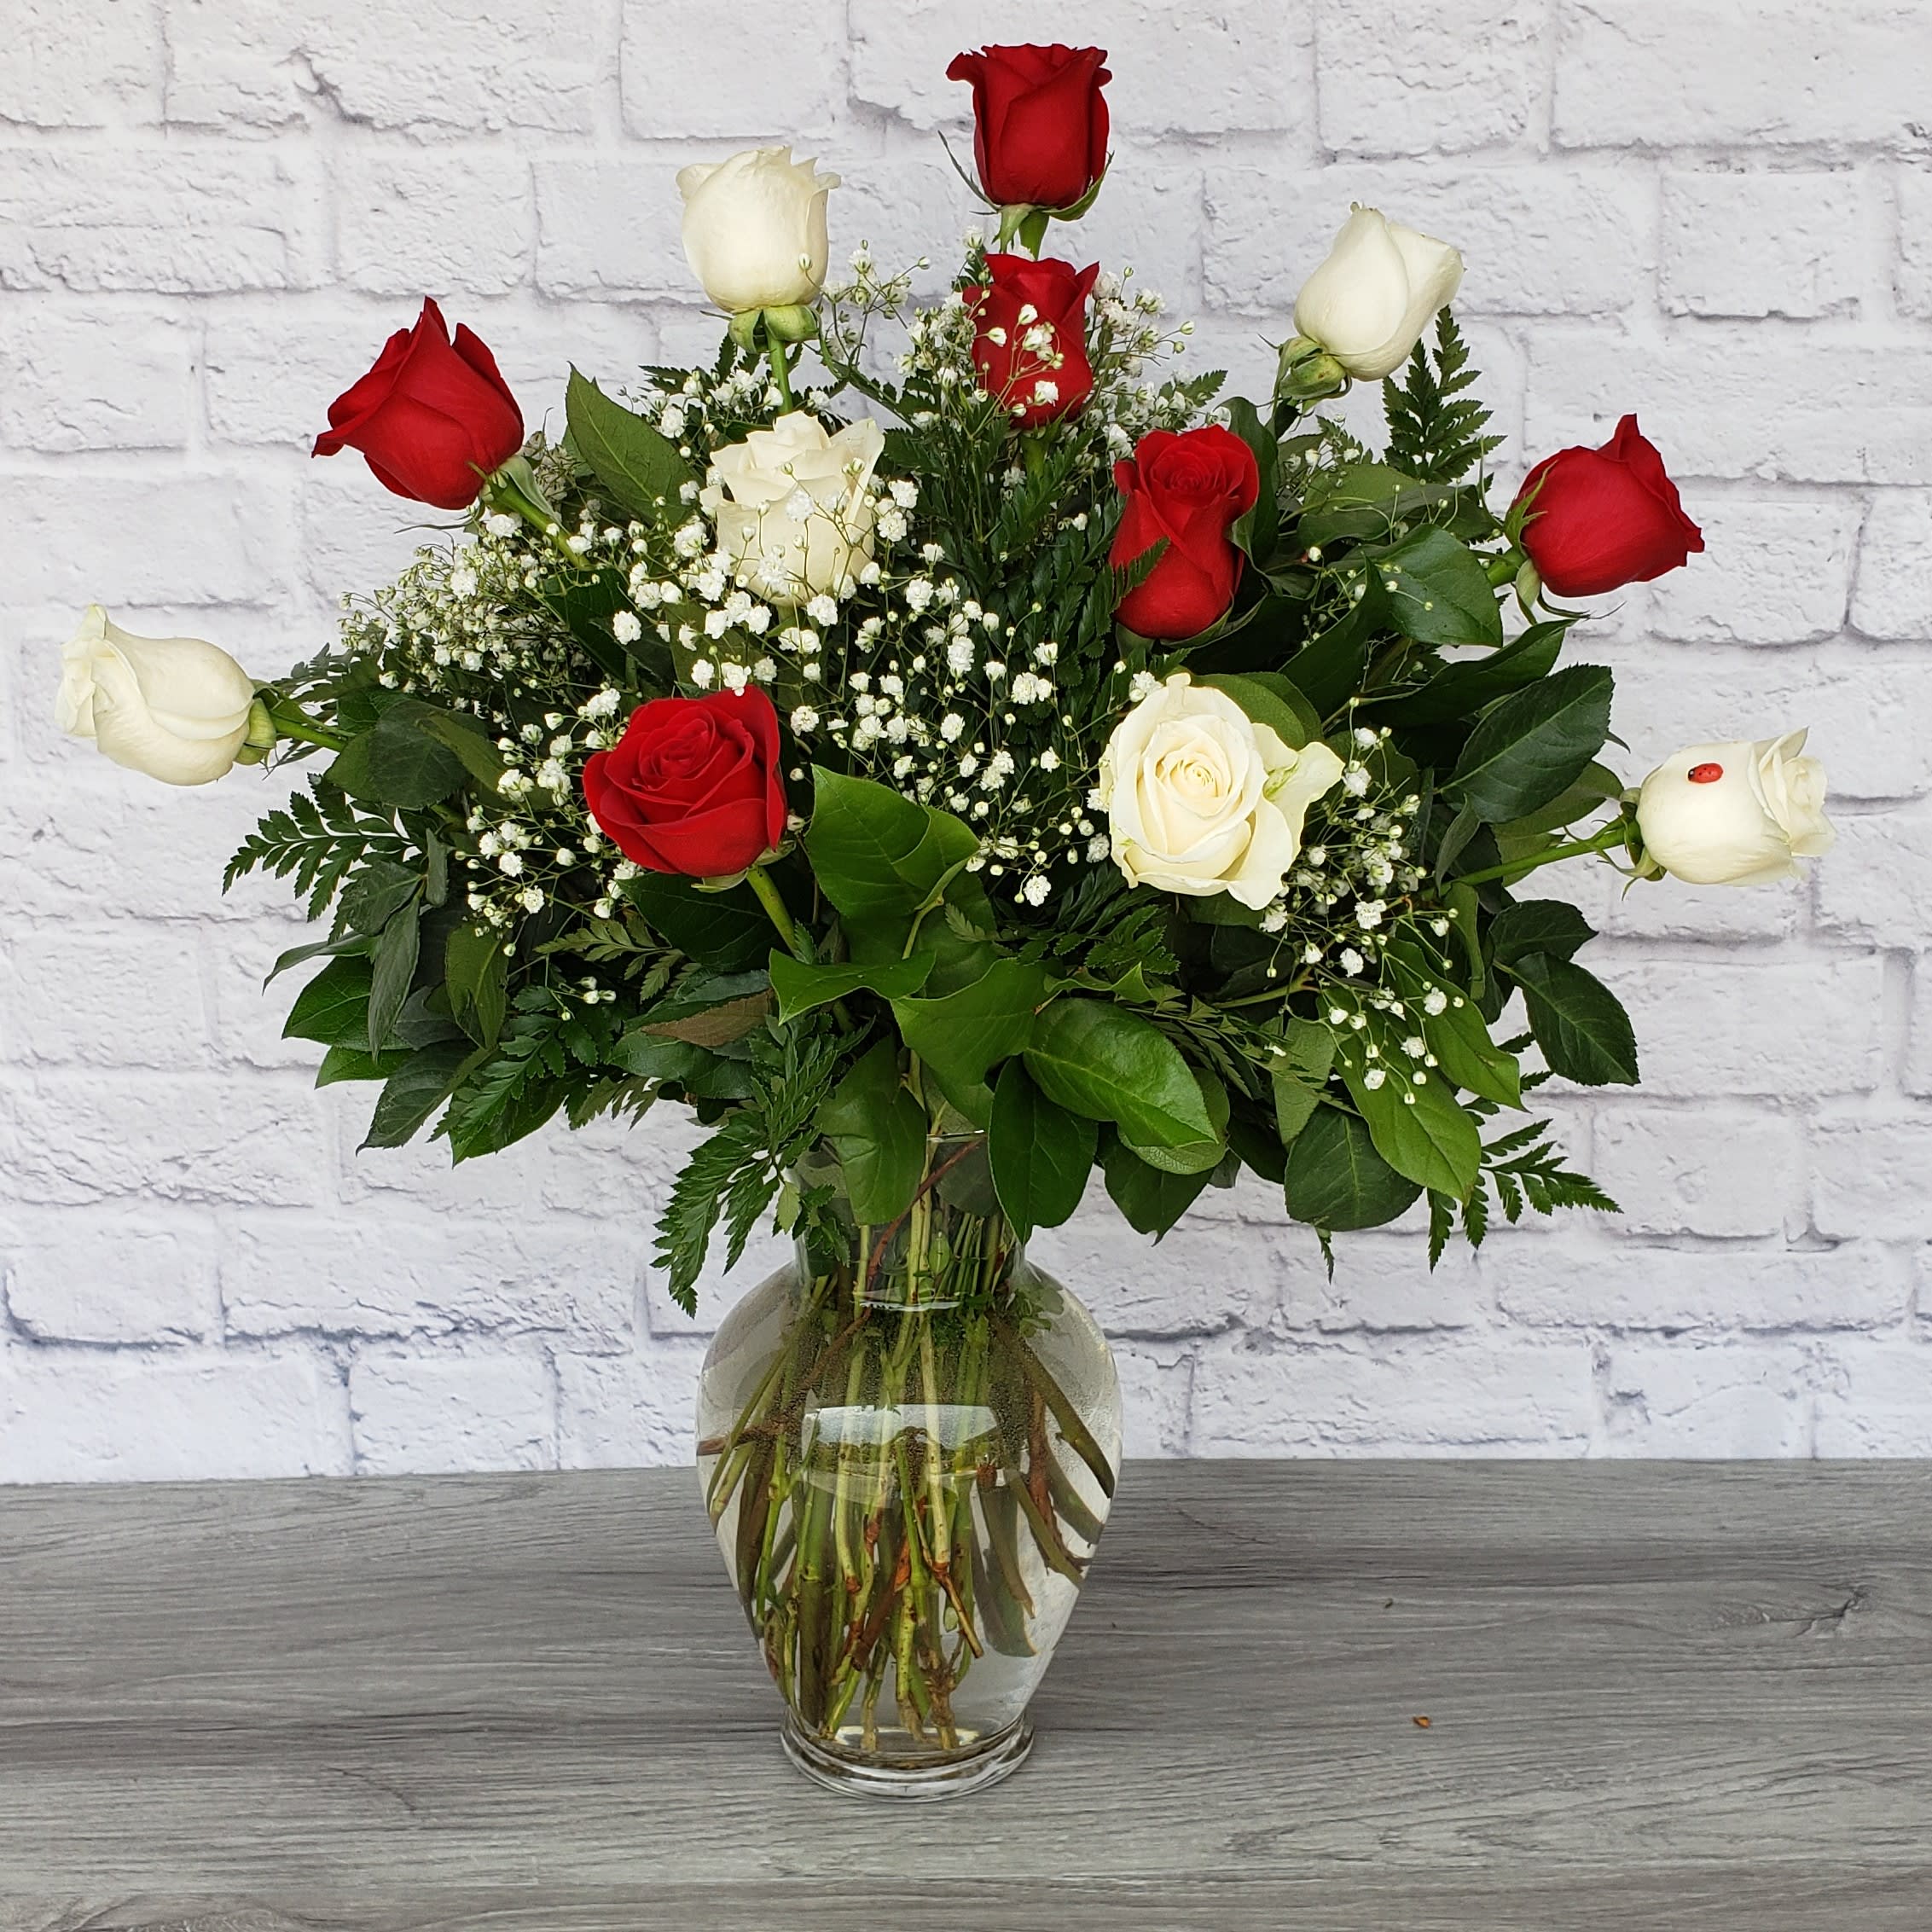 Dozen Long Stemmed Red and White - Dozen Long Stemmed Red and White Roses is the perfect gift to show your love and appreciation.  All Round Orientation 24” Tall 24” Wide